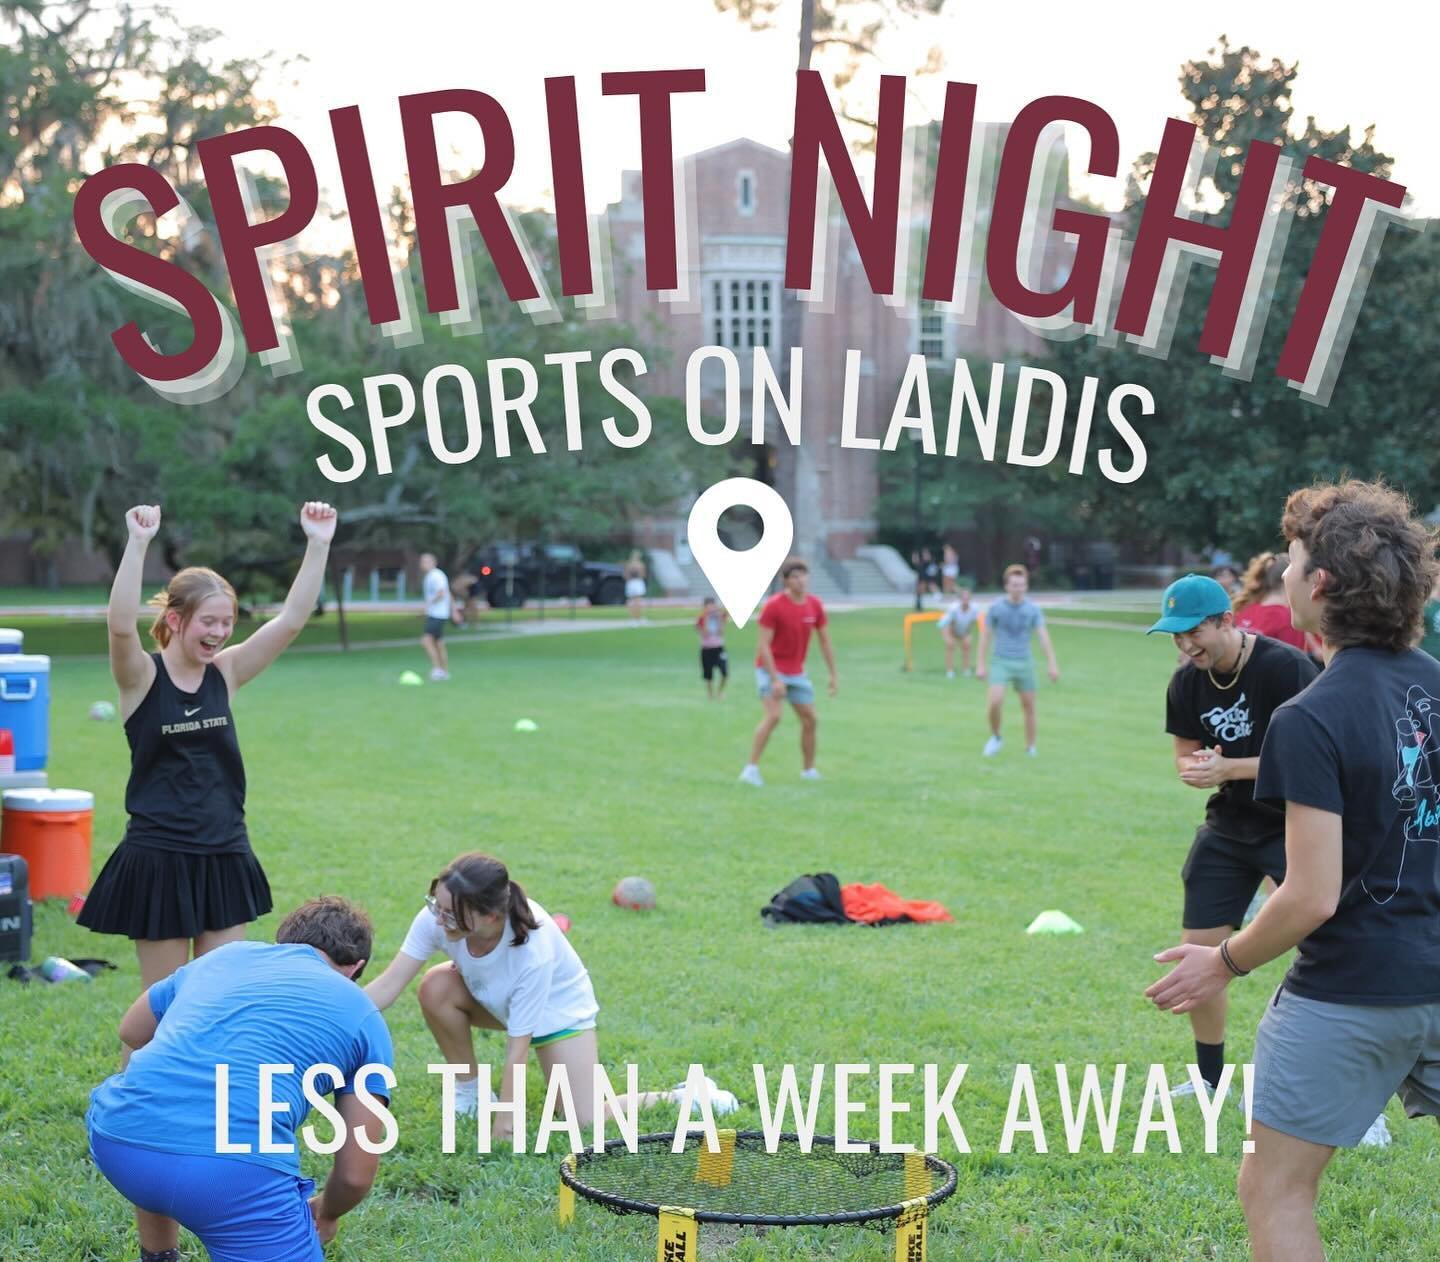 Summer semester is just around the corner! Join us for Spirit Night on Tuesday! This Tuesday (May 14th), we&rsquo;ll be out on Landis Green playing sports to kick off the semester. Join us at 7pm... there WILL be a slip and slide with popsicles... Do